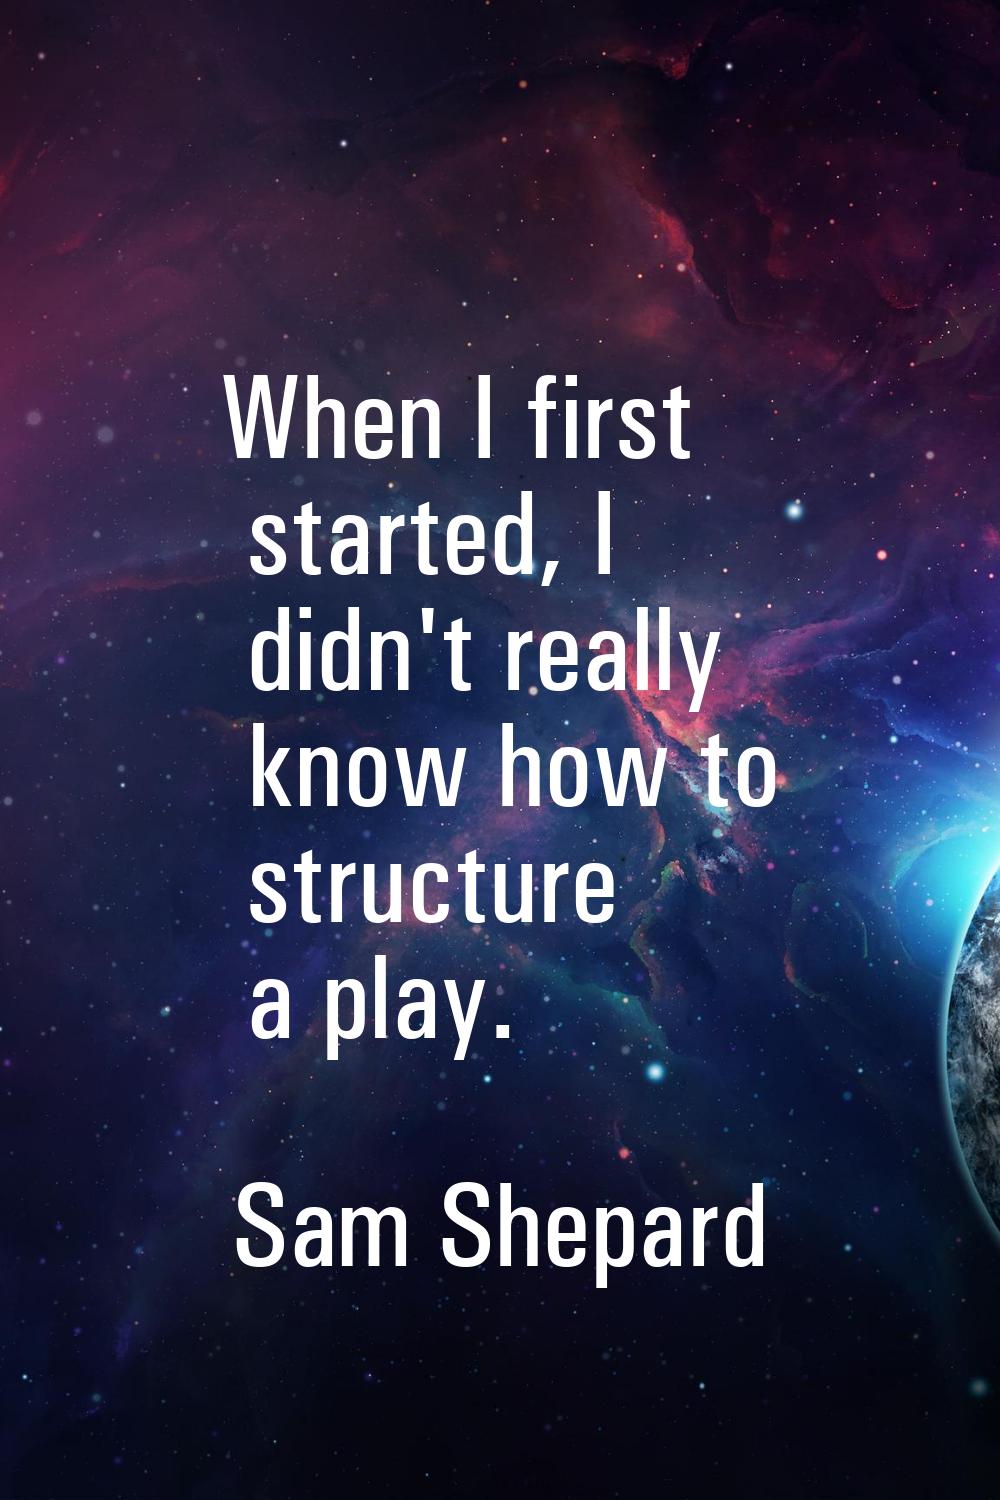 When I first started, I didn't really know how to structure a play.